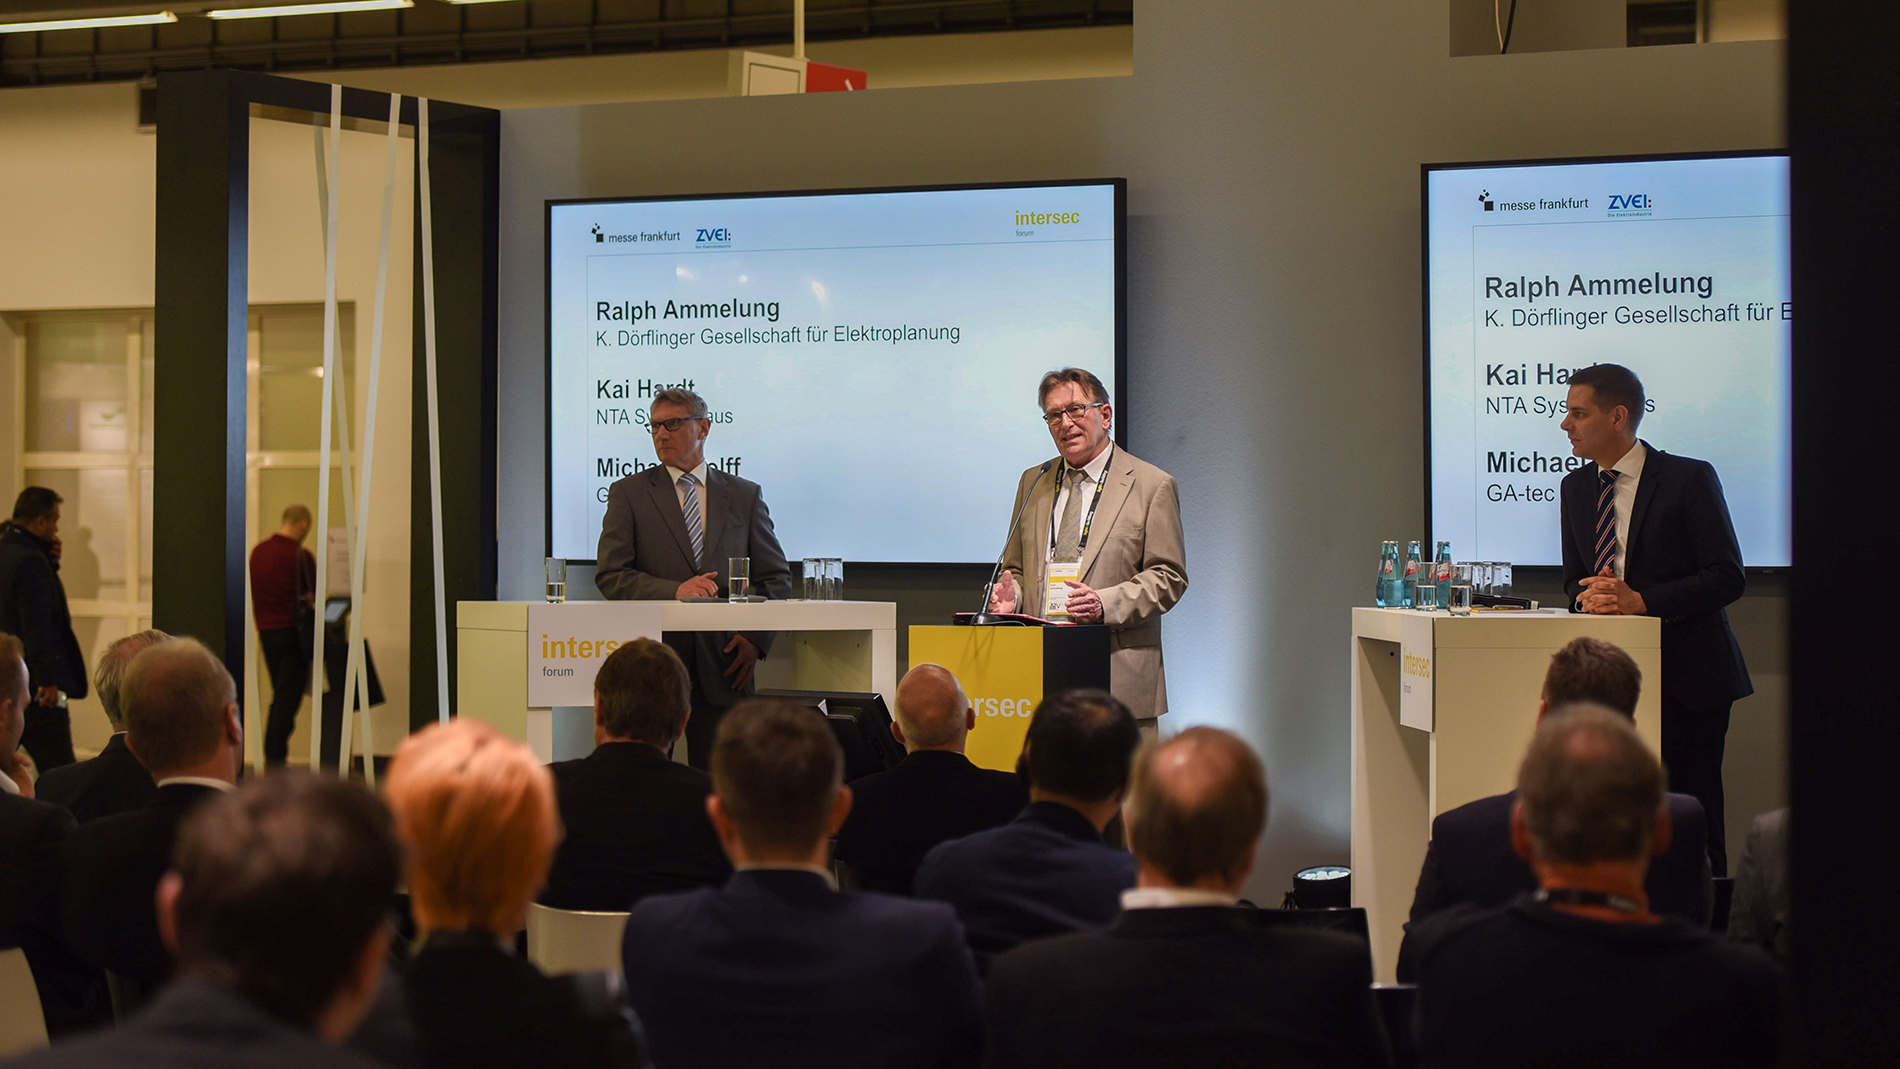 Intersec Forum: Expert information for planners and installation contractors of connected security systems (Source: Messe Frankfurt GmbH / Sandra Gätke 2018)